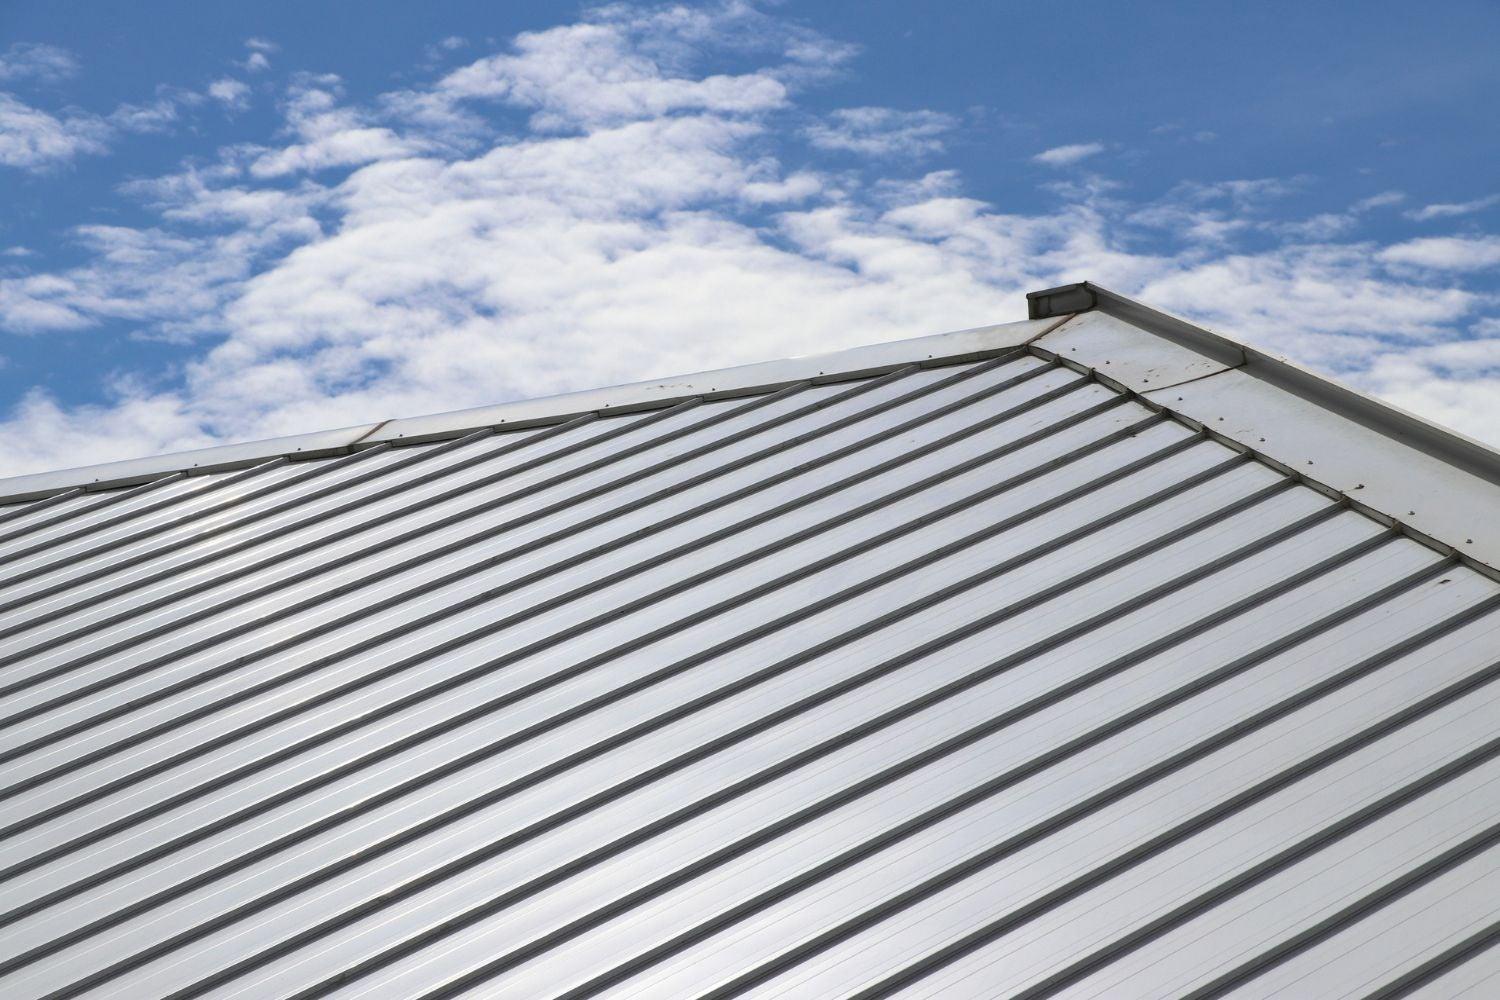 Standing Seam Metal Roof Spacing: Importance and Guidelines